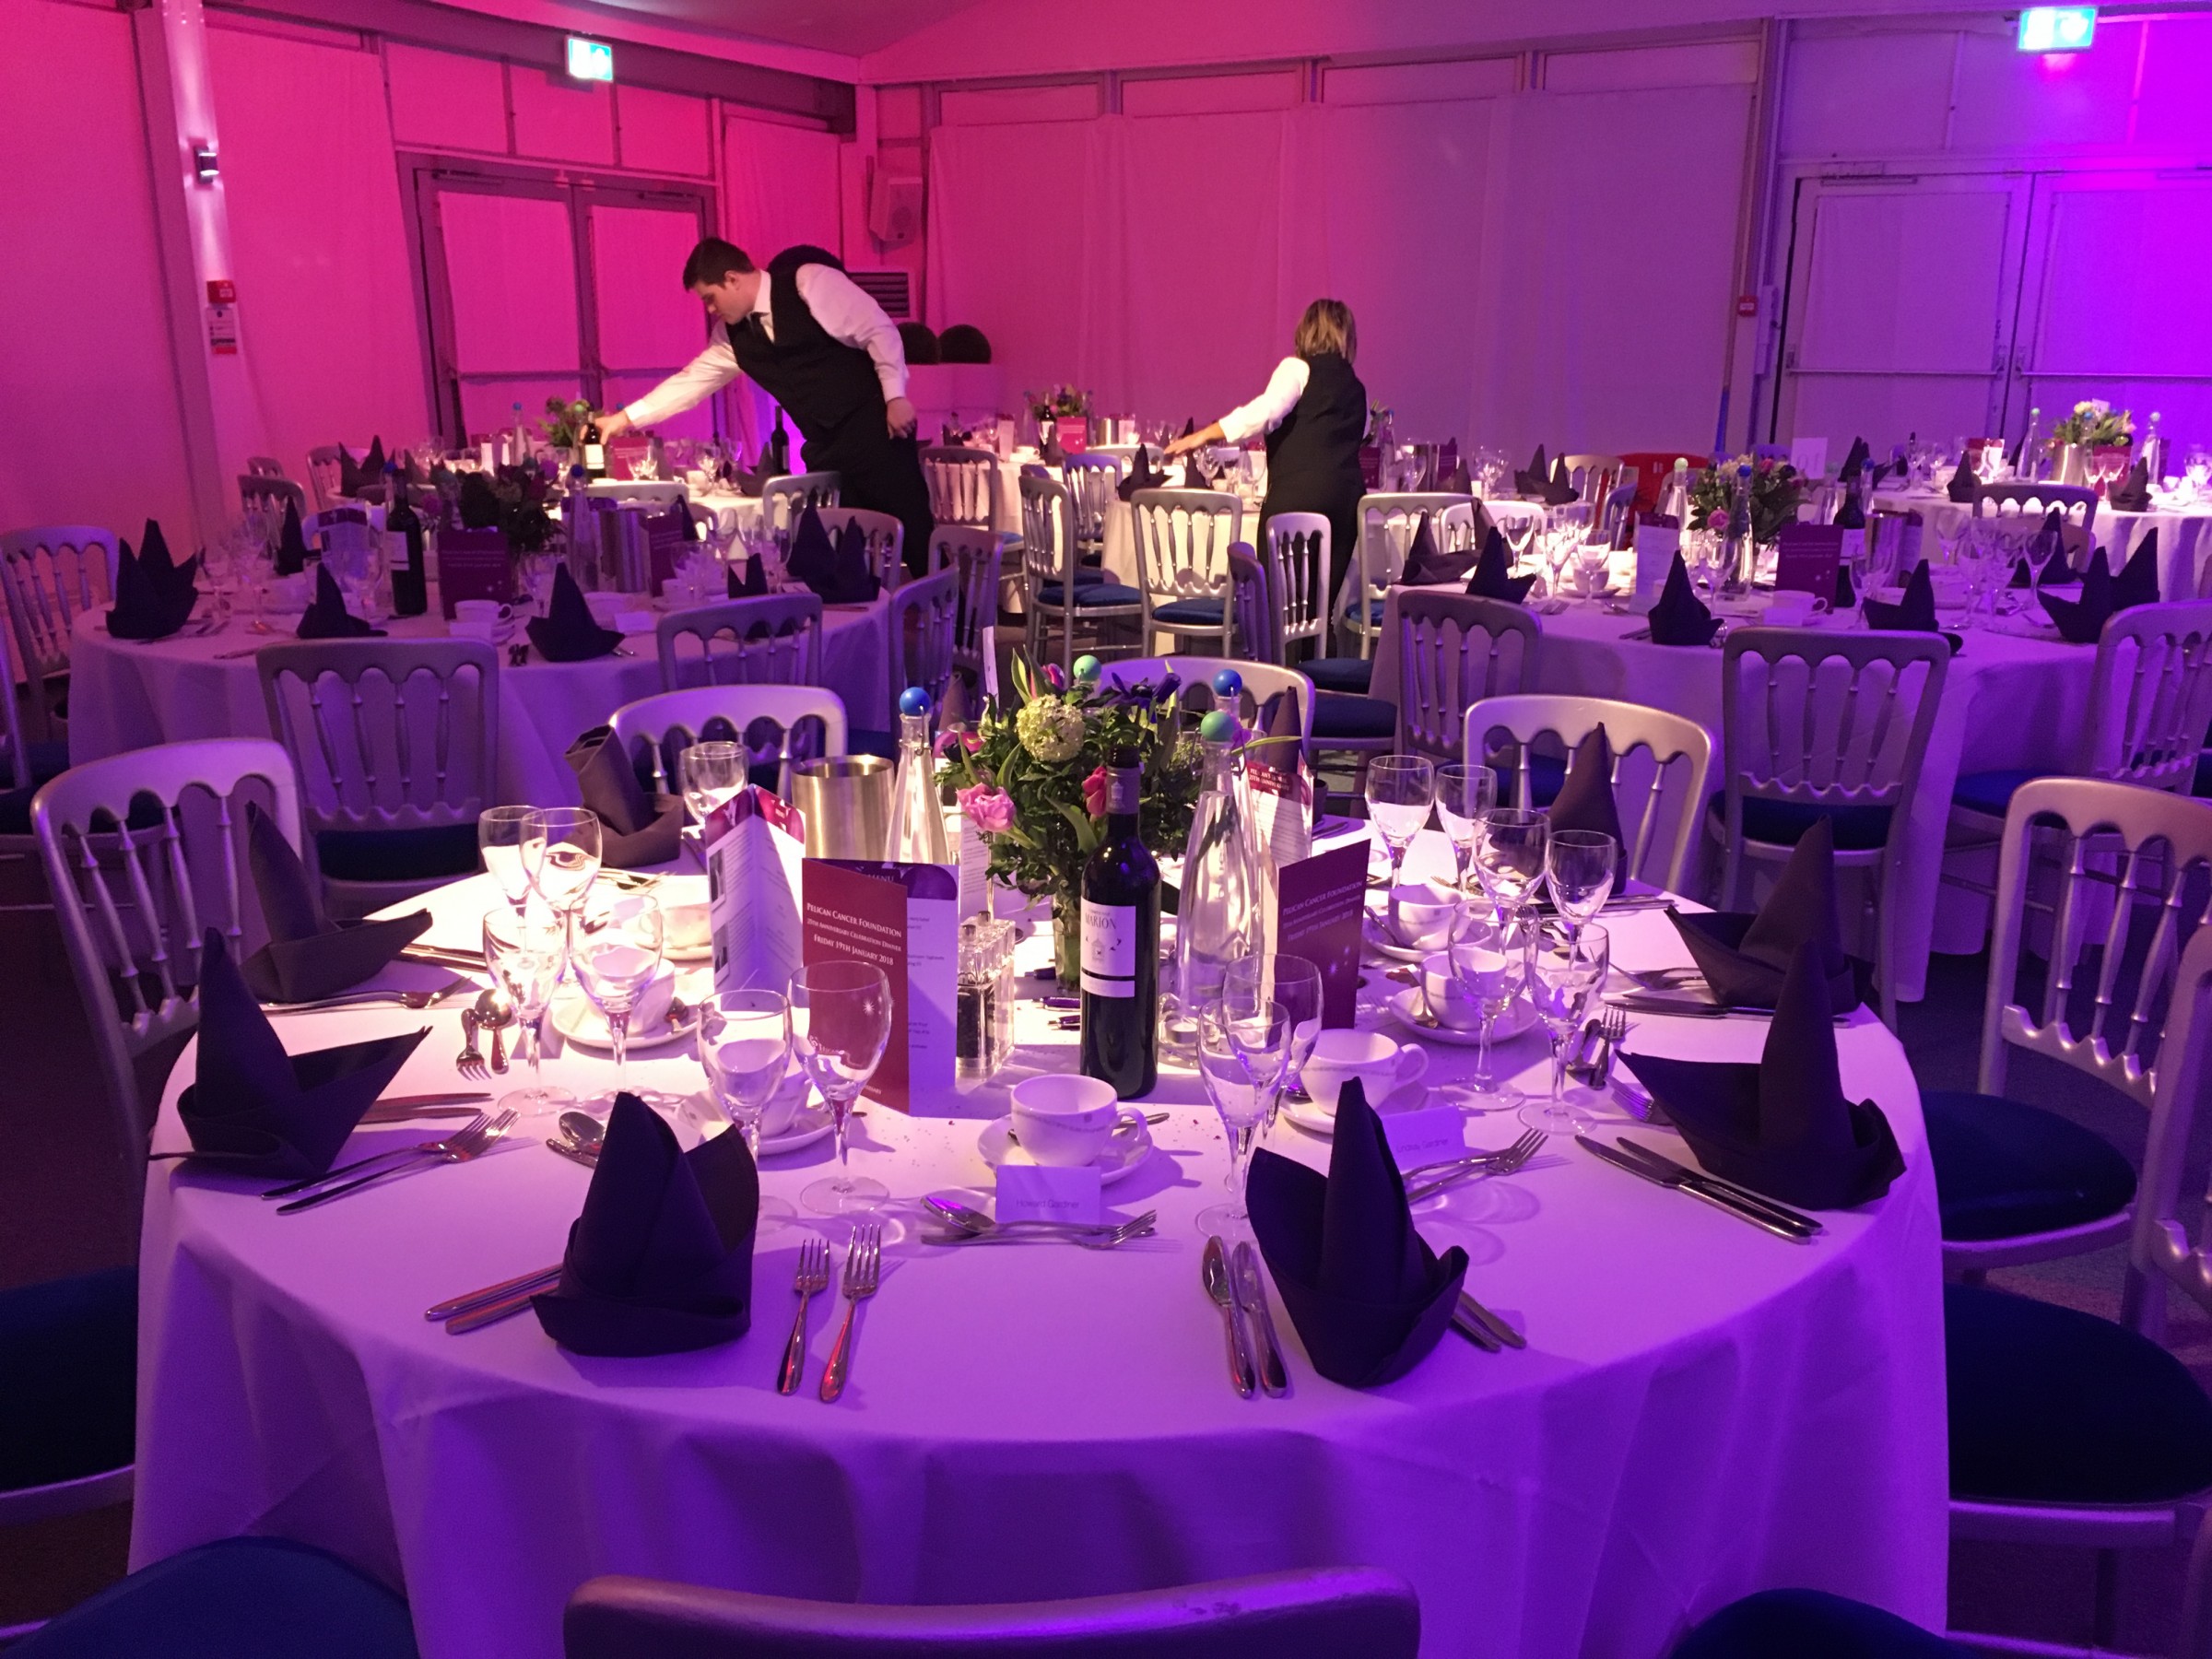 Dinner for Pelican Cancer Charity held at The Ark Conference Centre in Basingstoke Hampshire